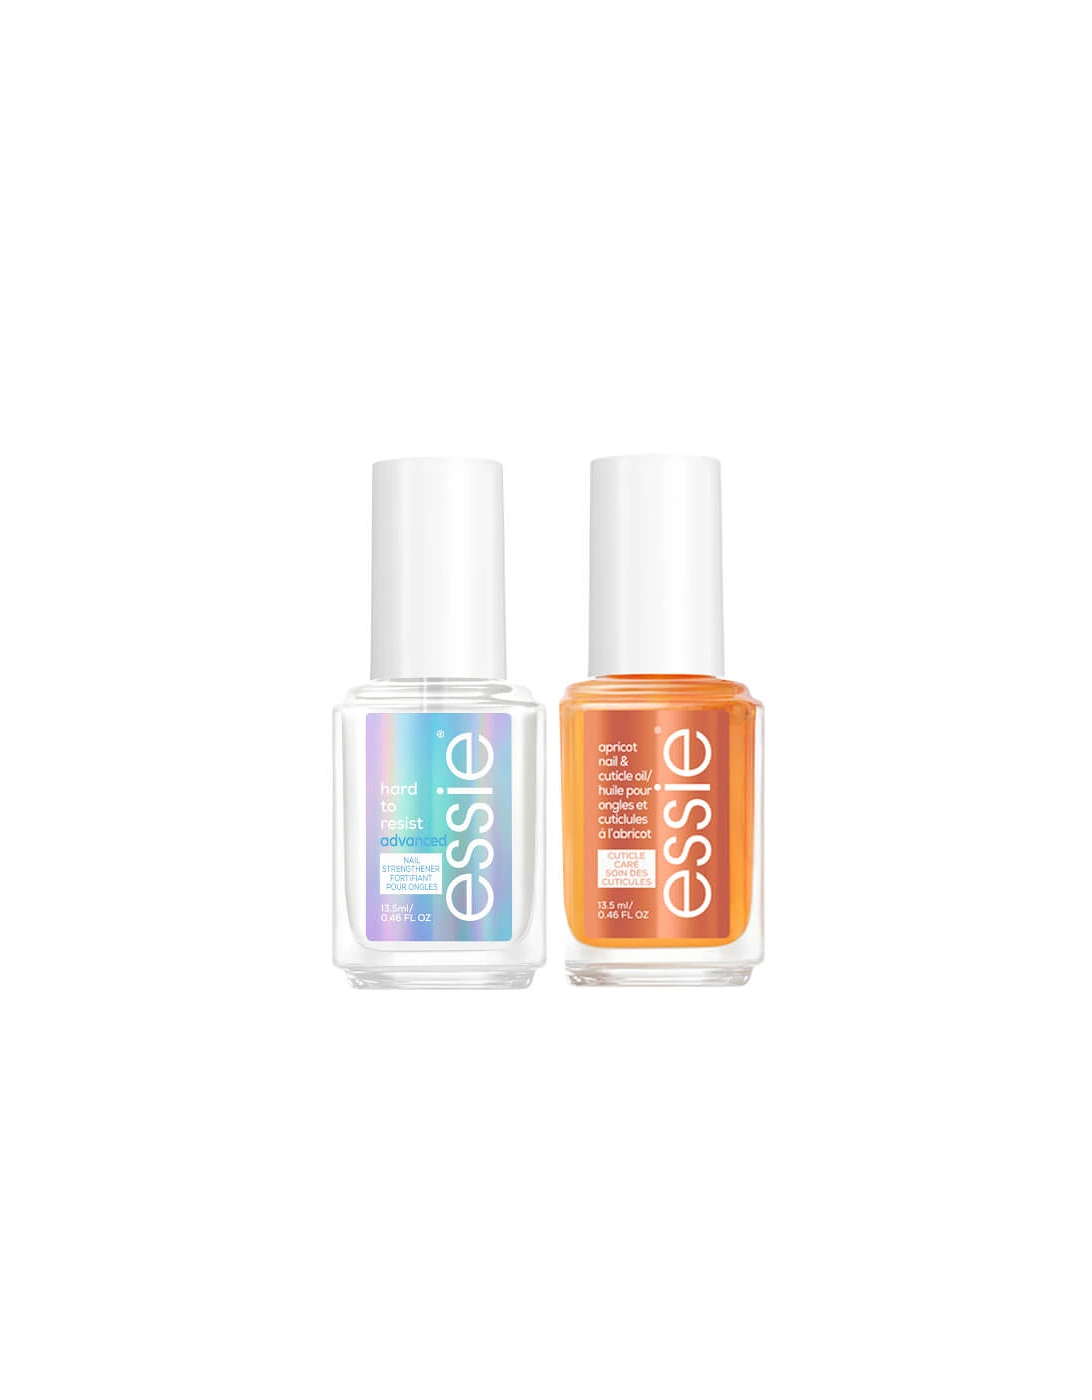 Nail Care Hard to Resist Advanced and Cuticle Oil Apricot Treatment Duo Kit, 2 of 1